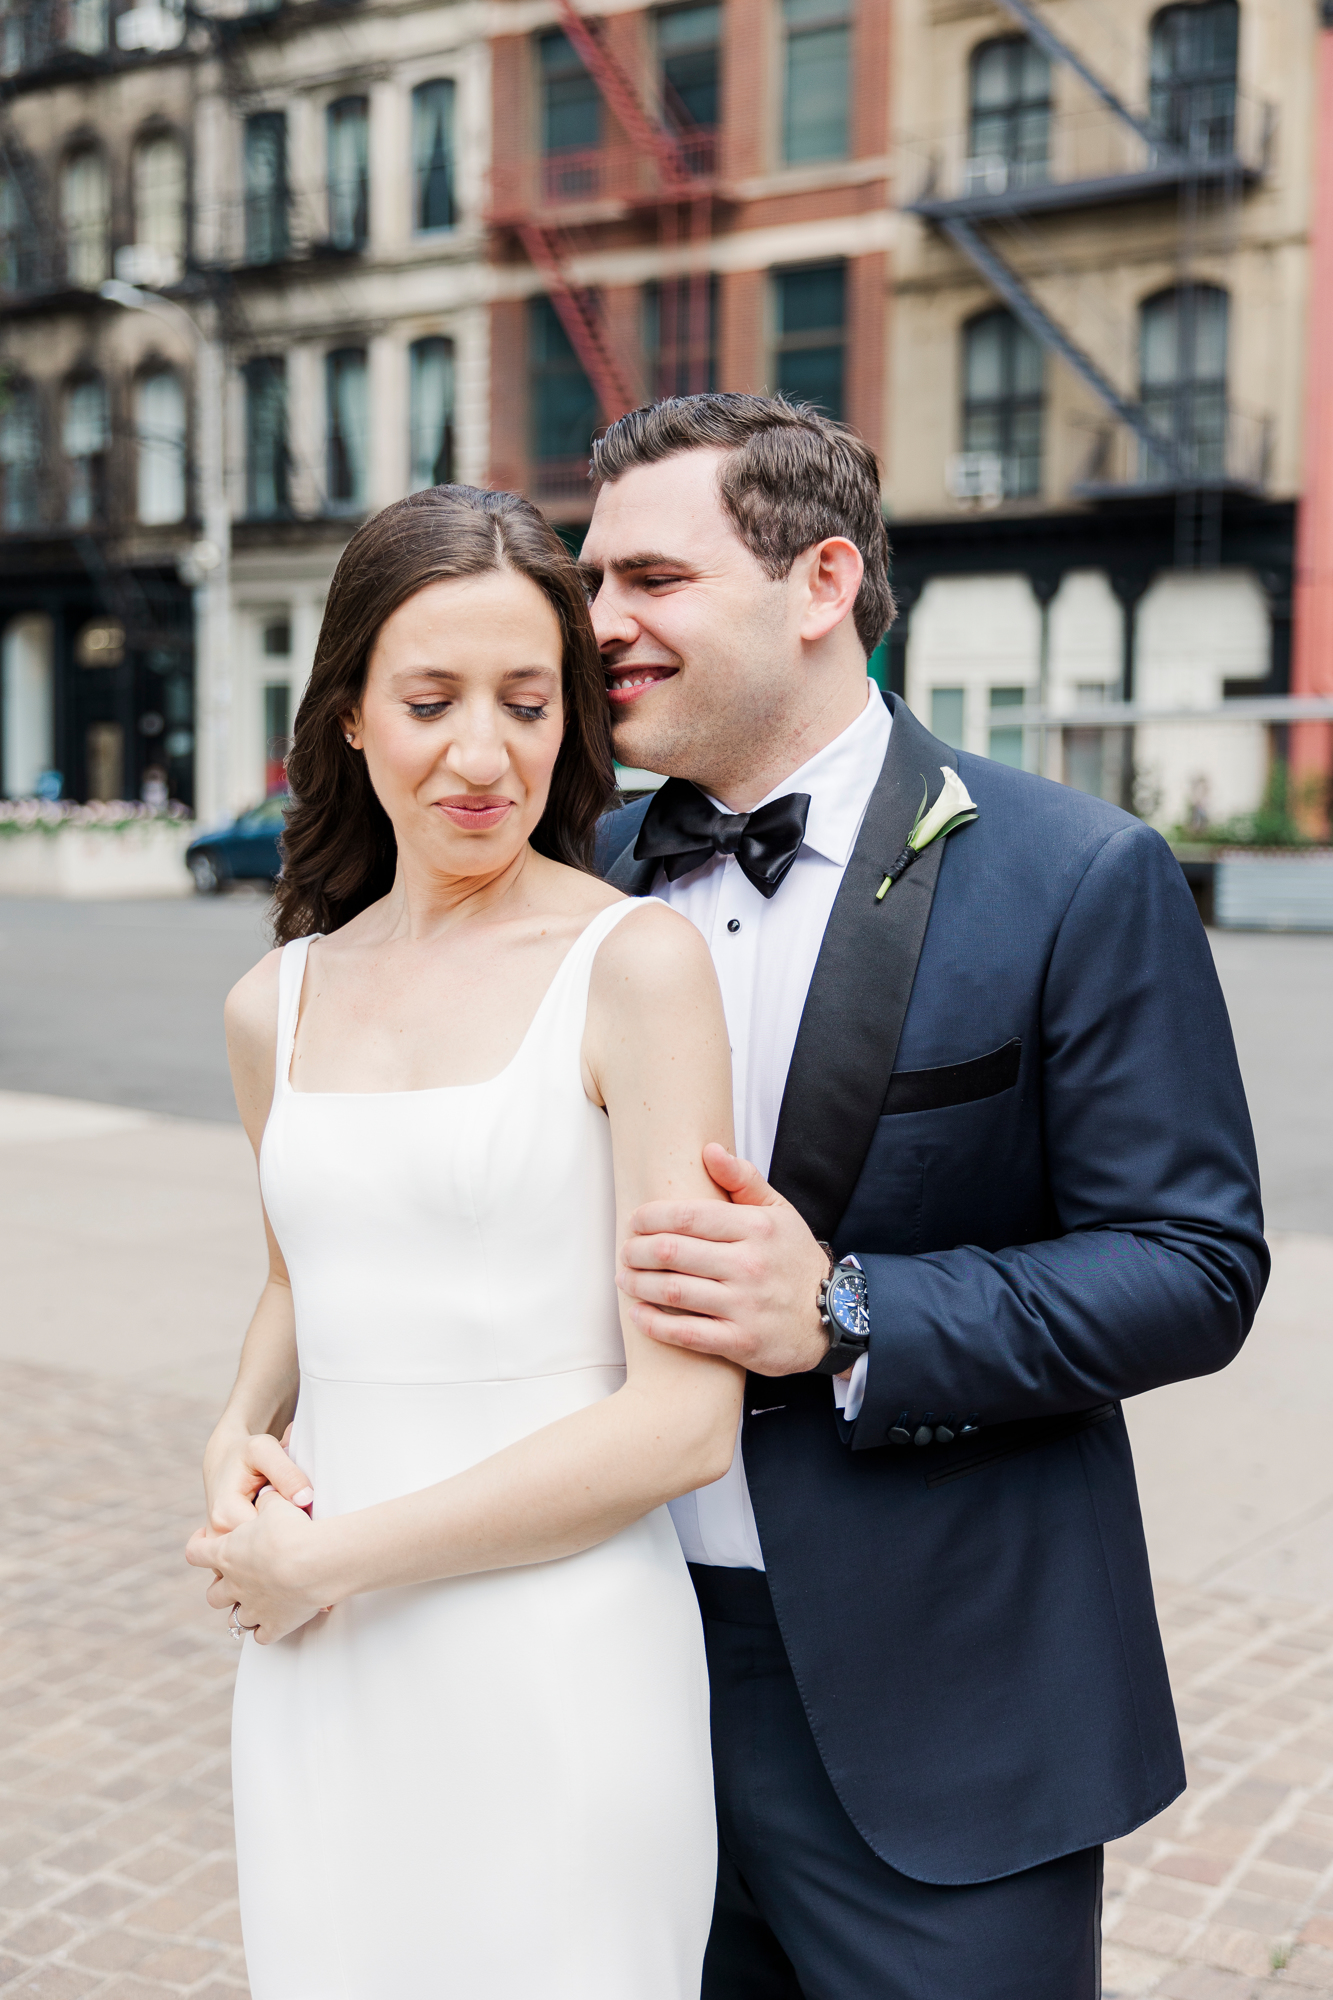 Lively Tribeca Rooftop Wedding Photography, NYC